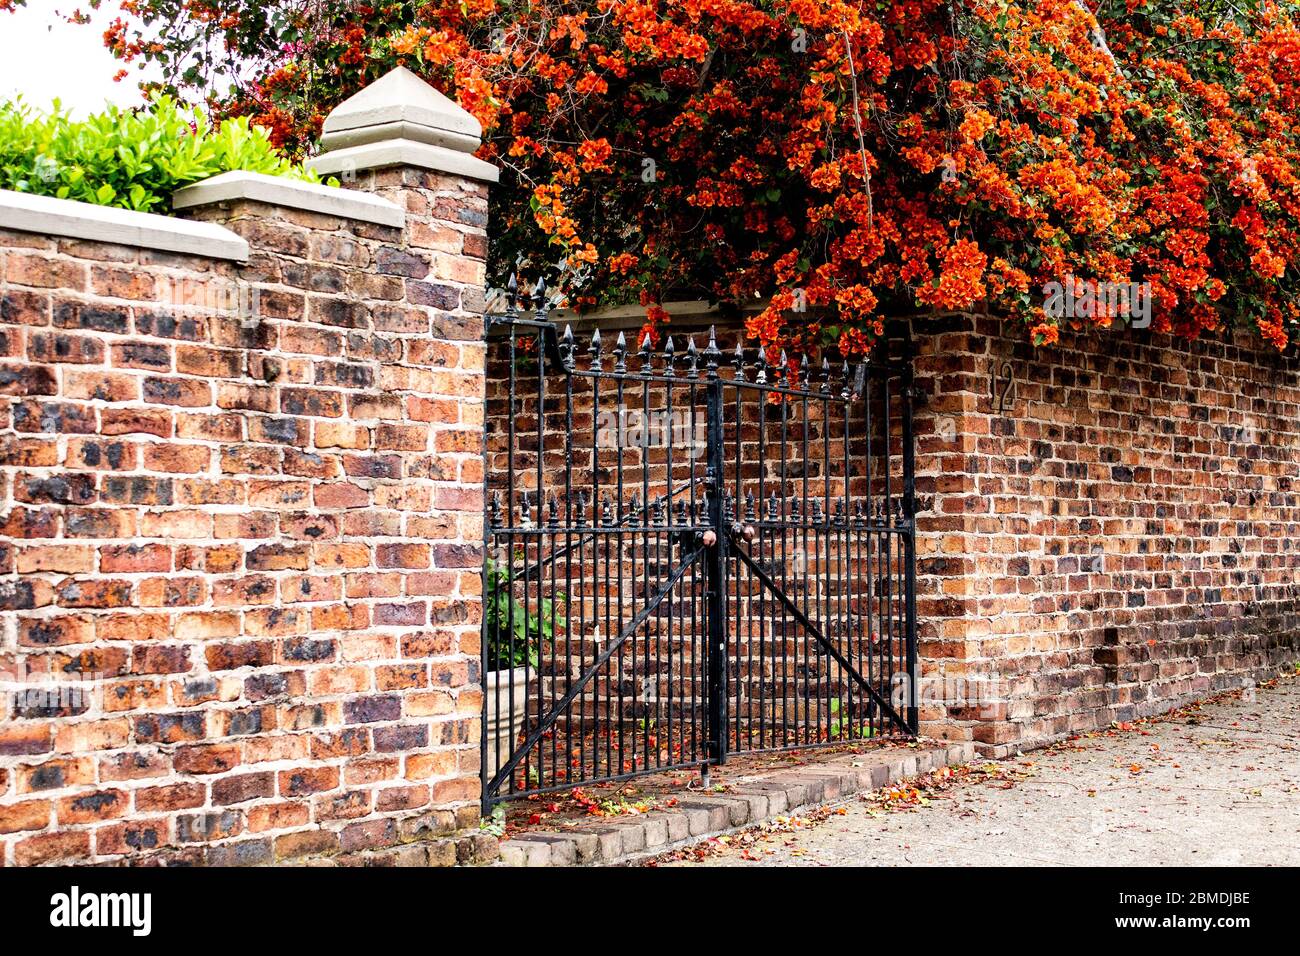 Black metal garden entrance gates set in brick fence with tree covered in orange flowers Stock Photo